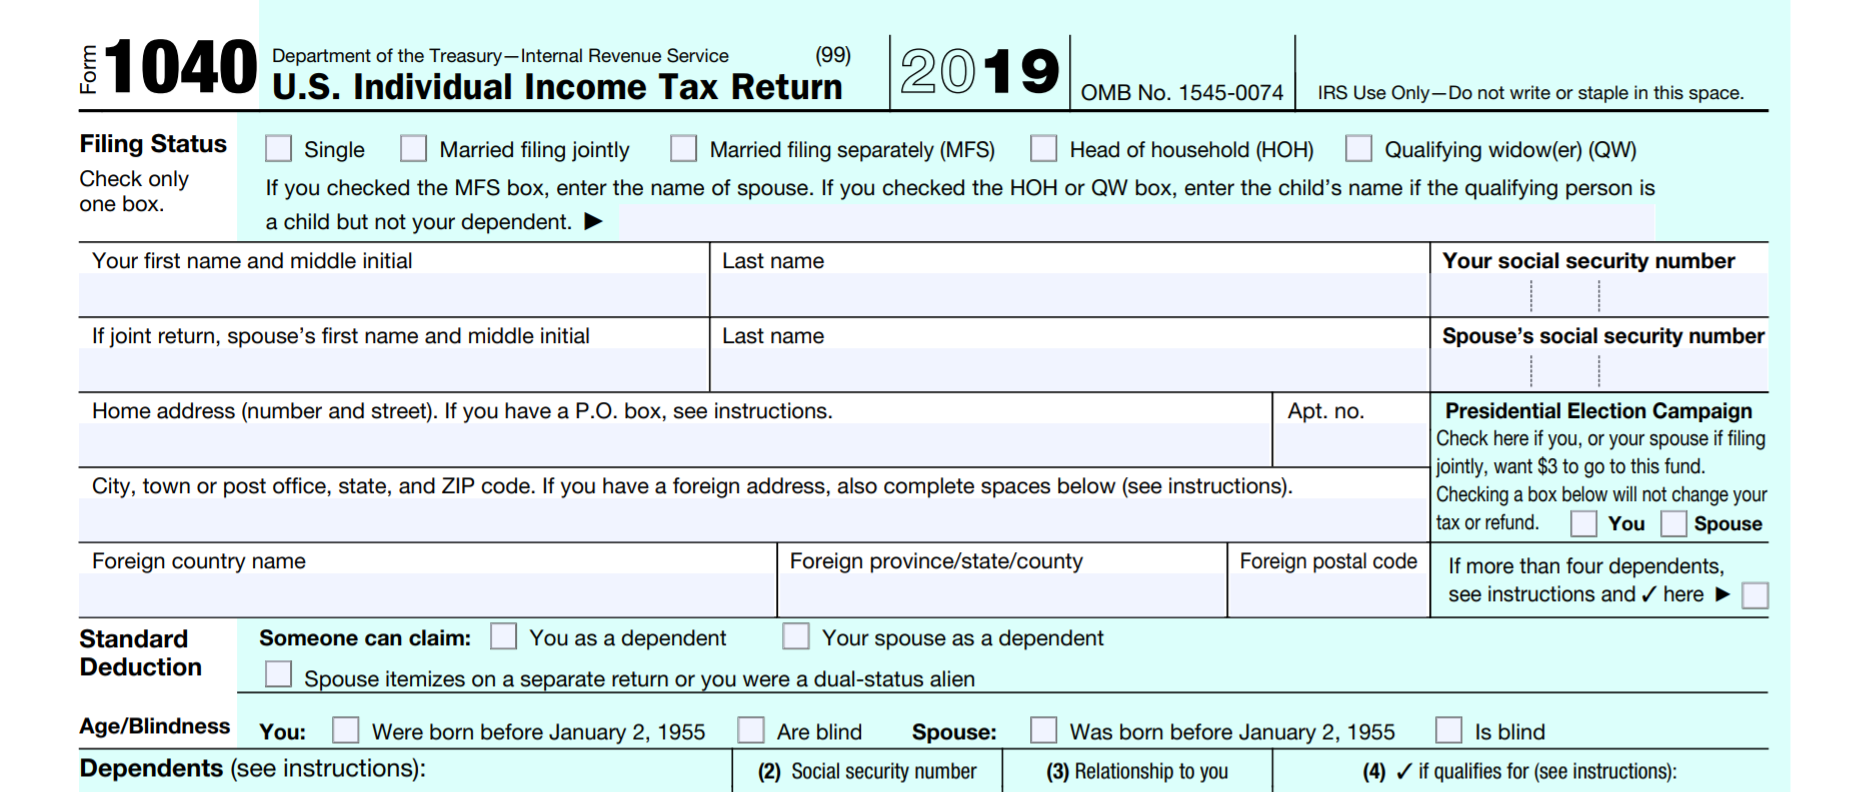 How To Check You Tax Return Agencypriority21